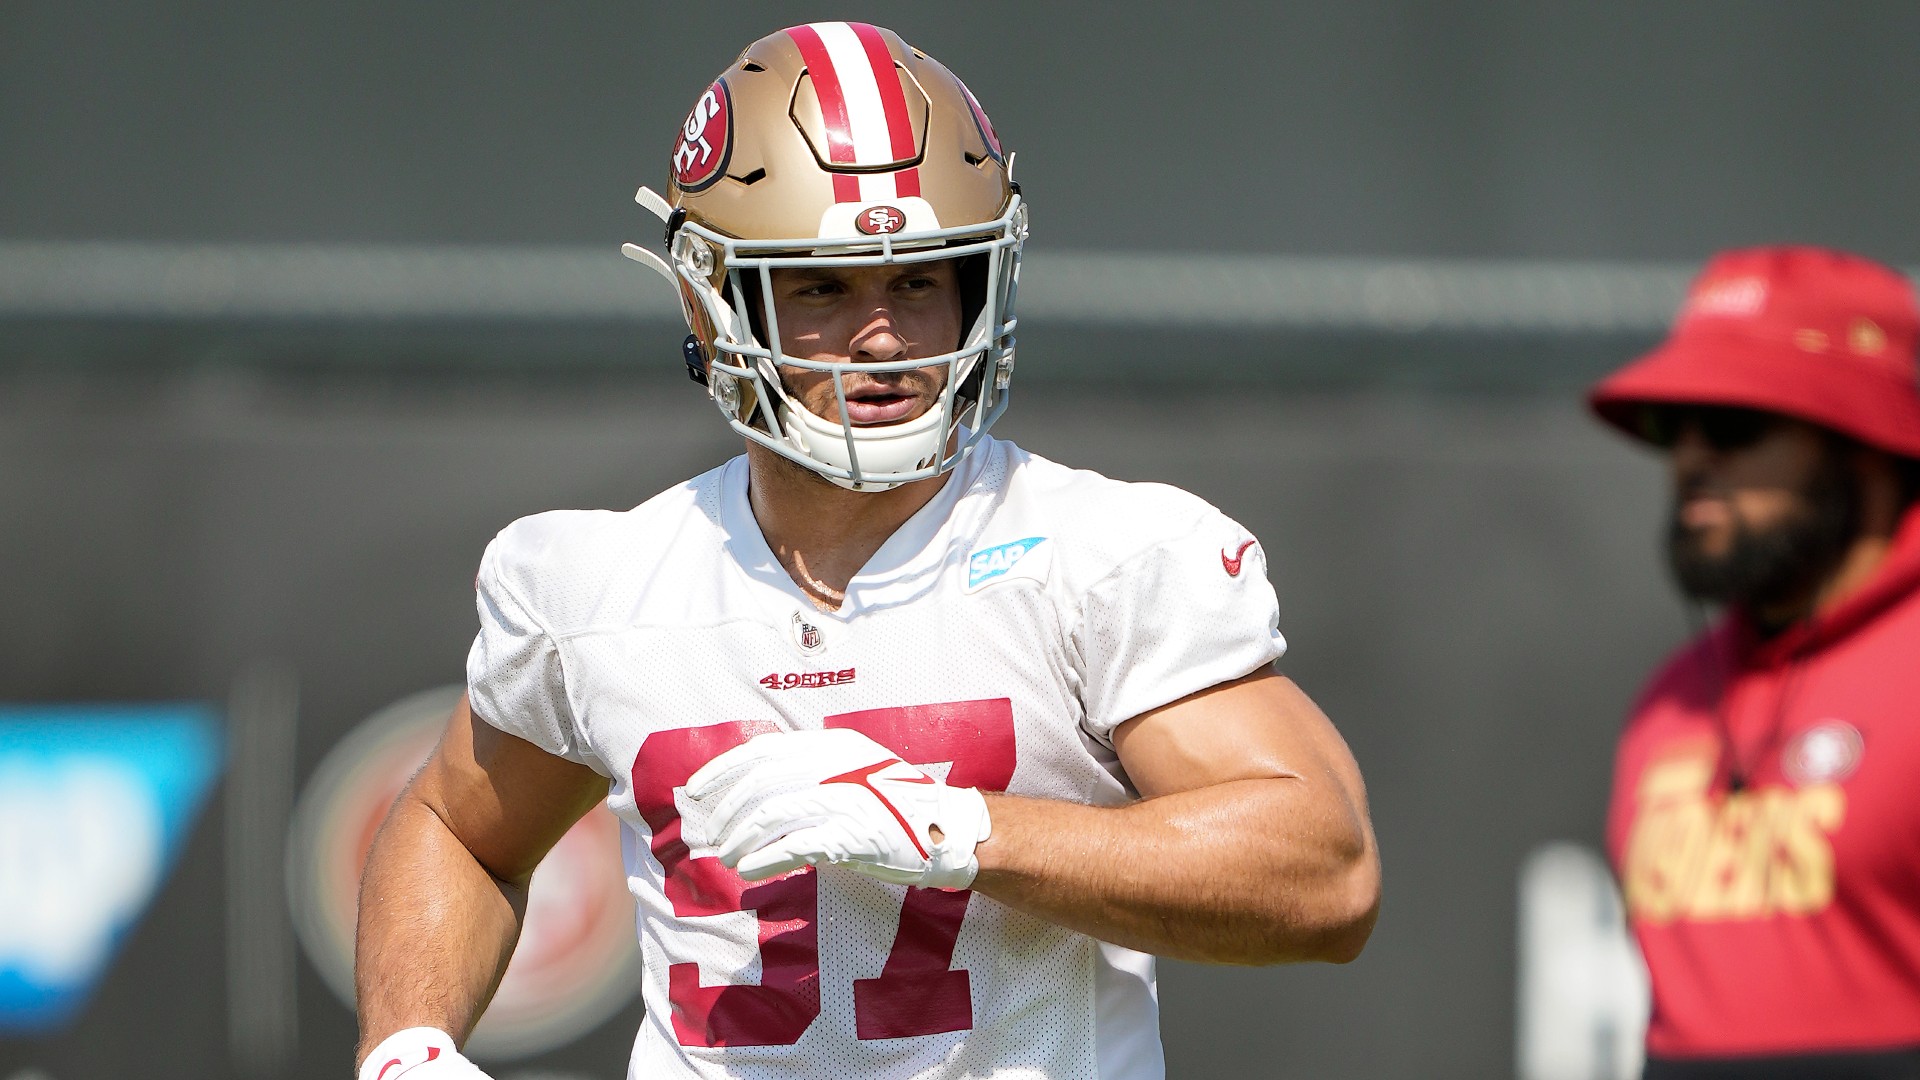 Nick Bosa is expected to be a full participant in San Francisco 49ers practice next week, putting him in line to start Week 1.